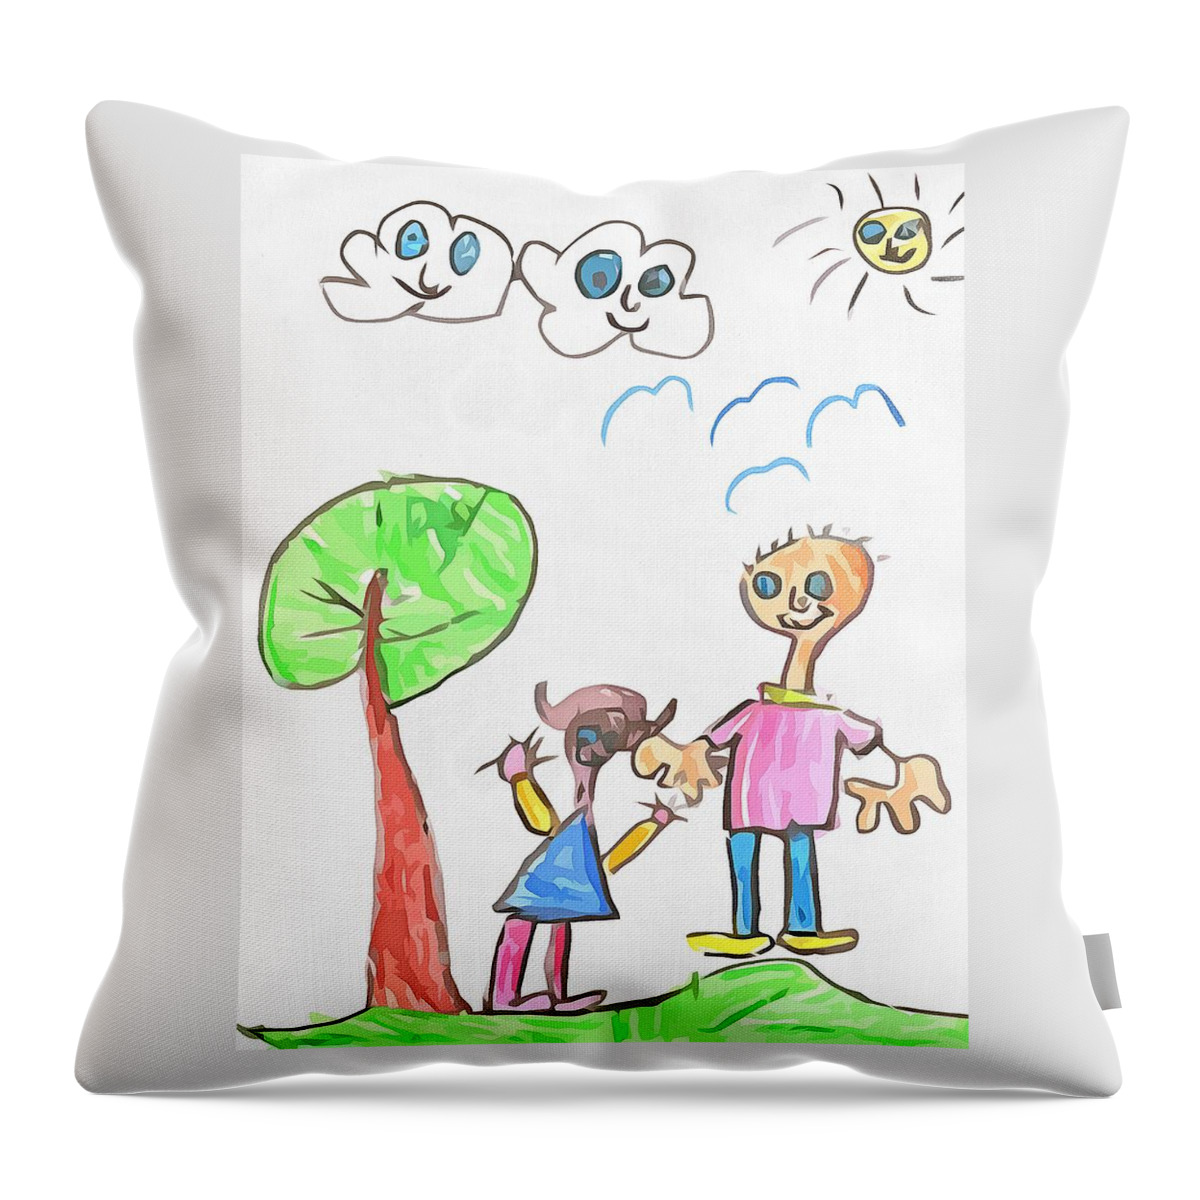 Peace Throw Pillow featuring the digital art Happy Faces by Maciek Froncisz